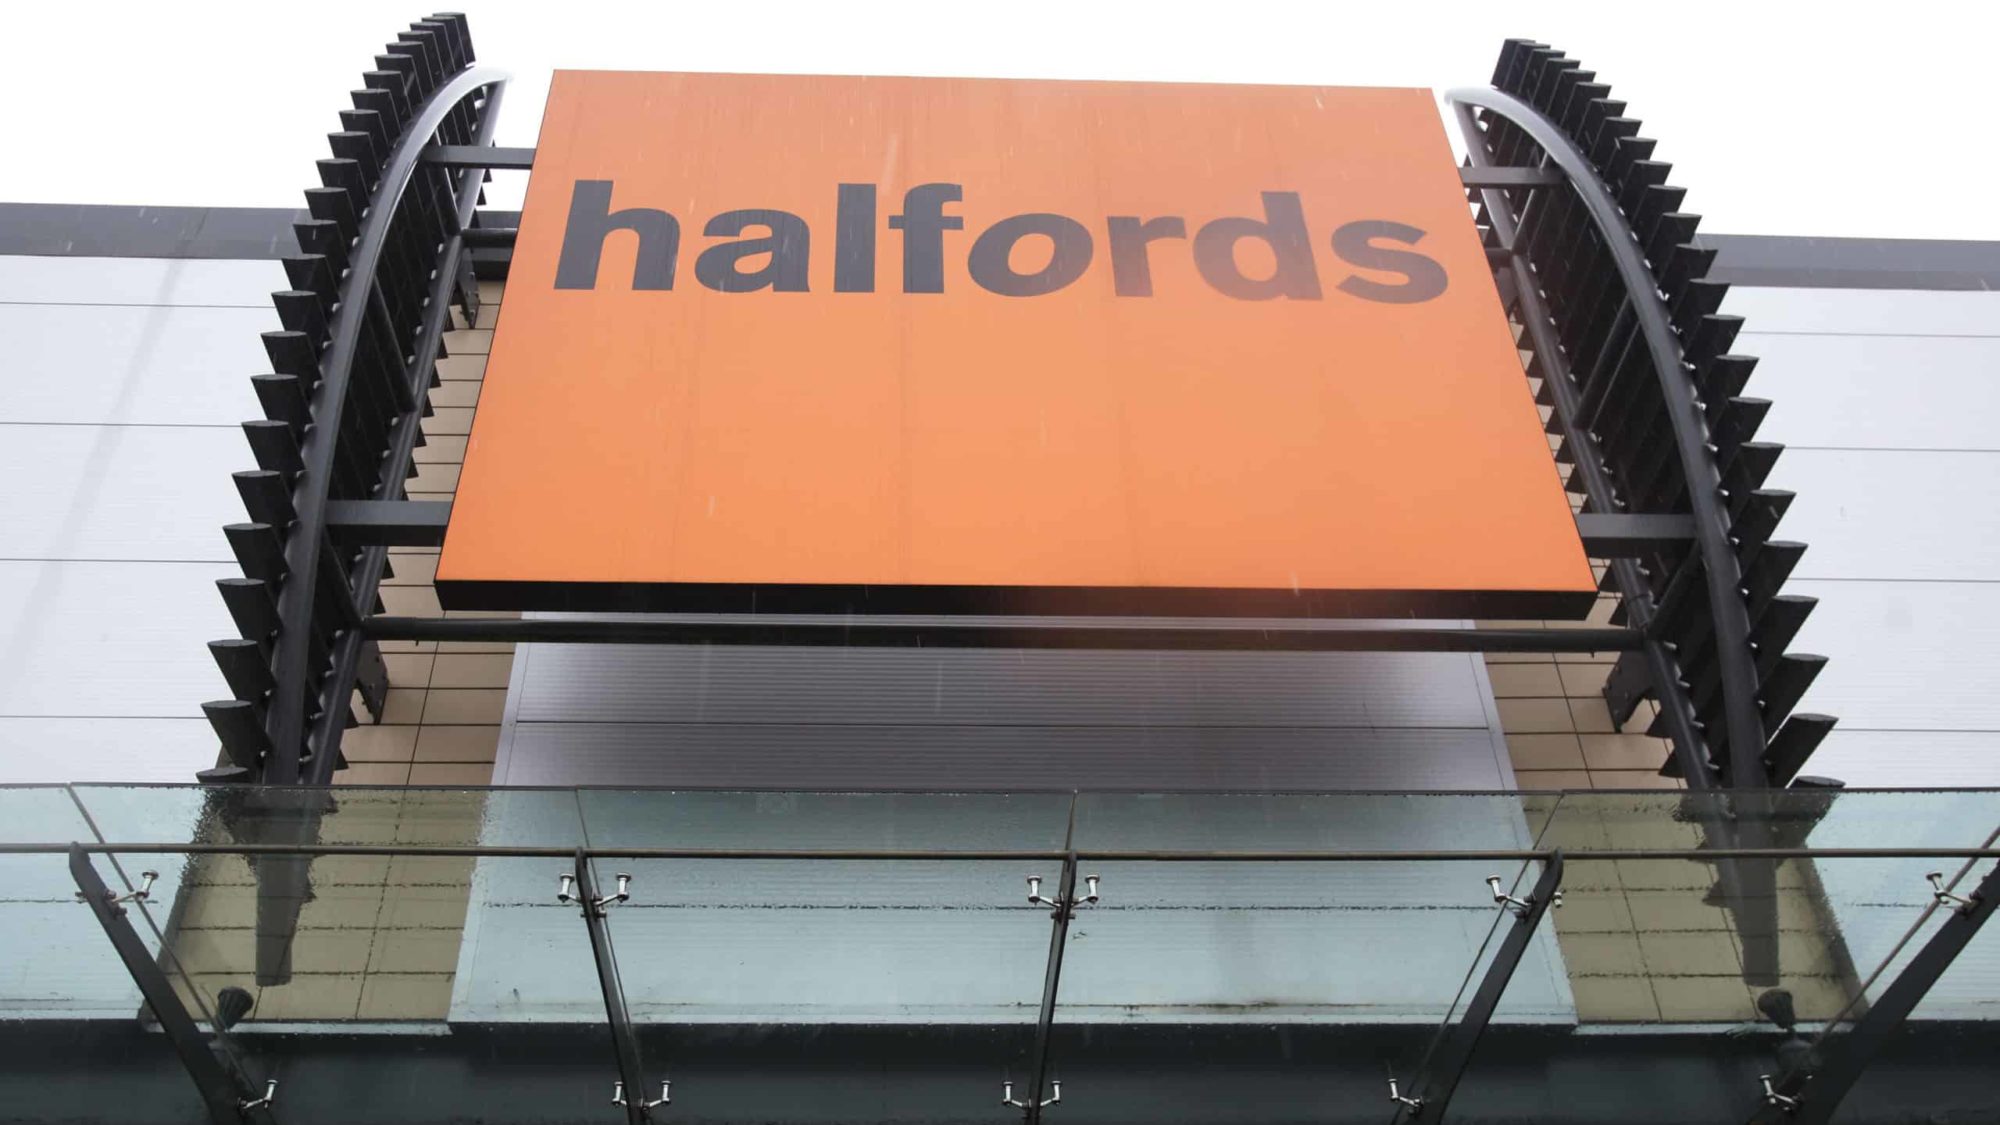 Halfords makes online acquisitions